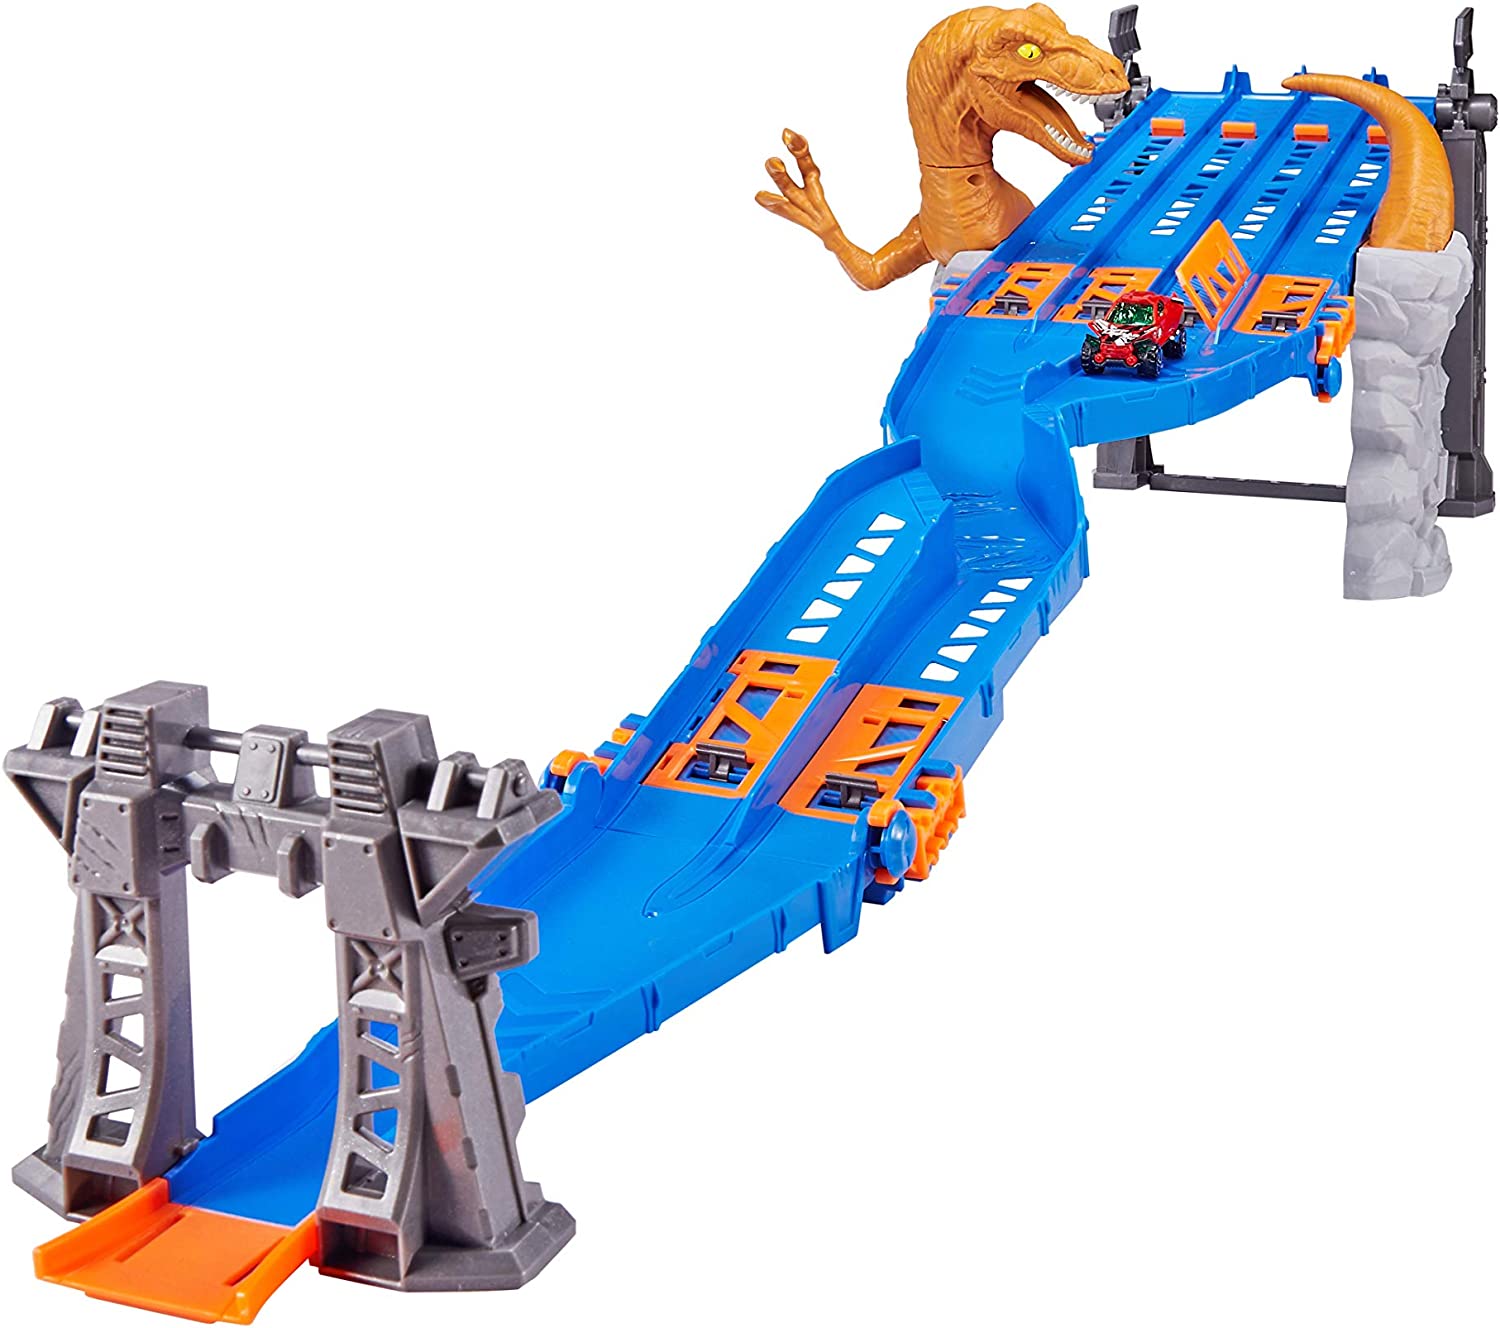 Metal Machines 4-Lane Raptor Attack Track Set Playset with Mini Racing Car $16.50 + Free Shipping w/ Prime or on $25+